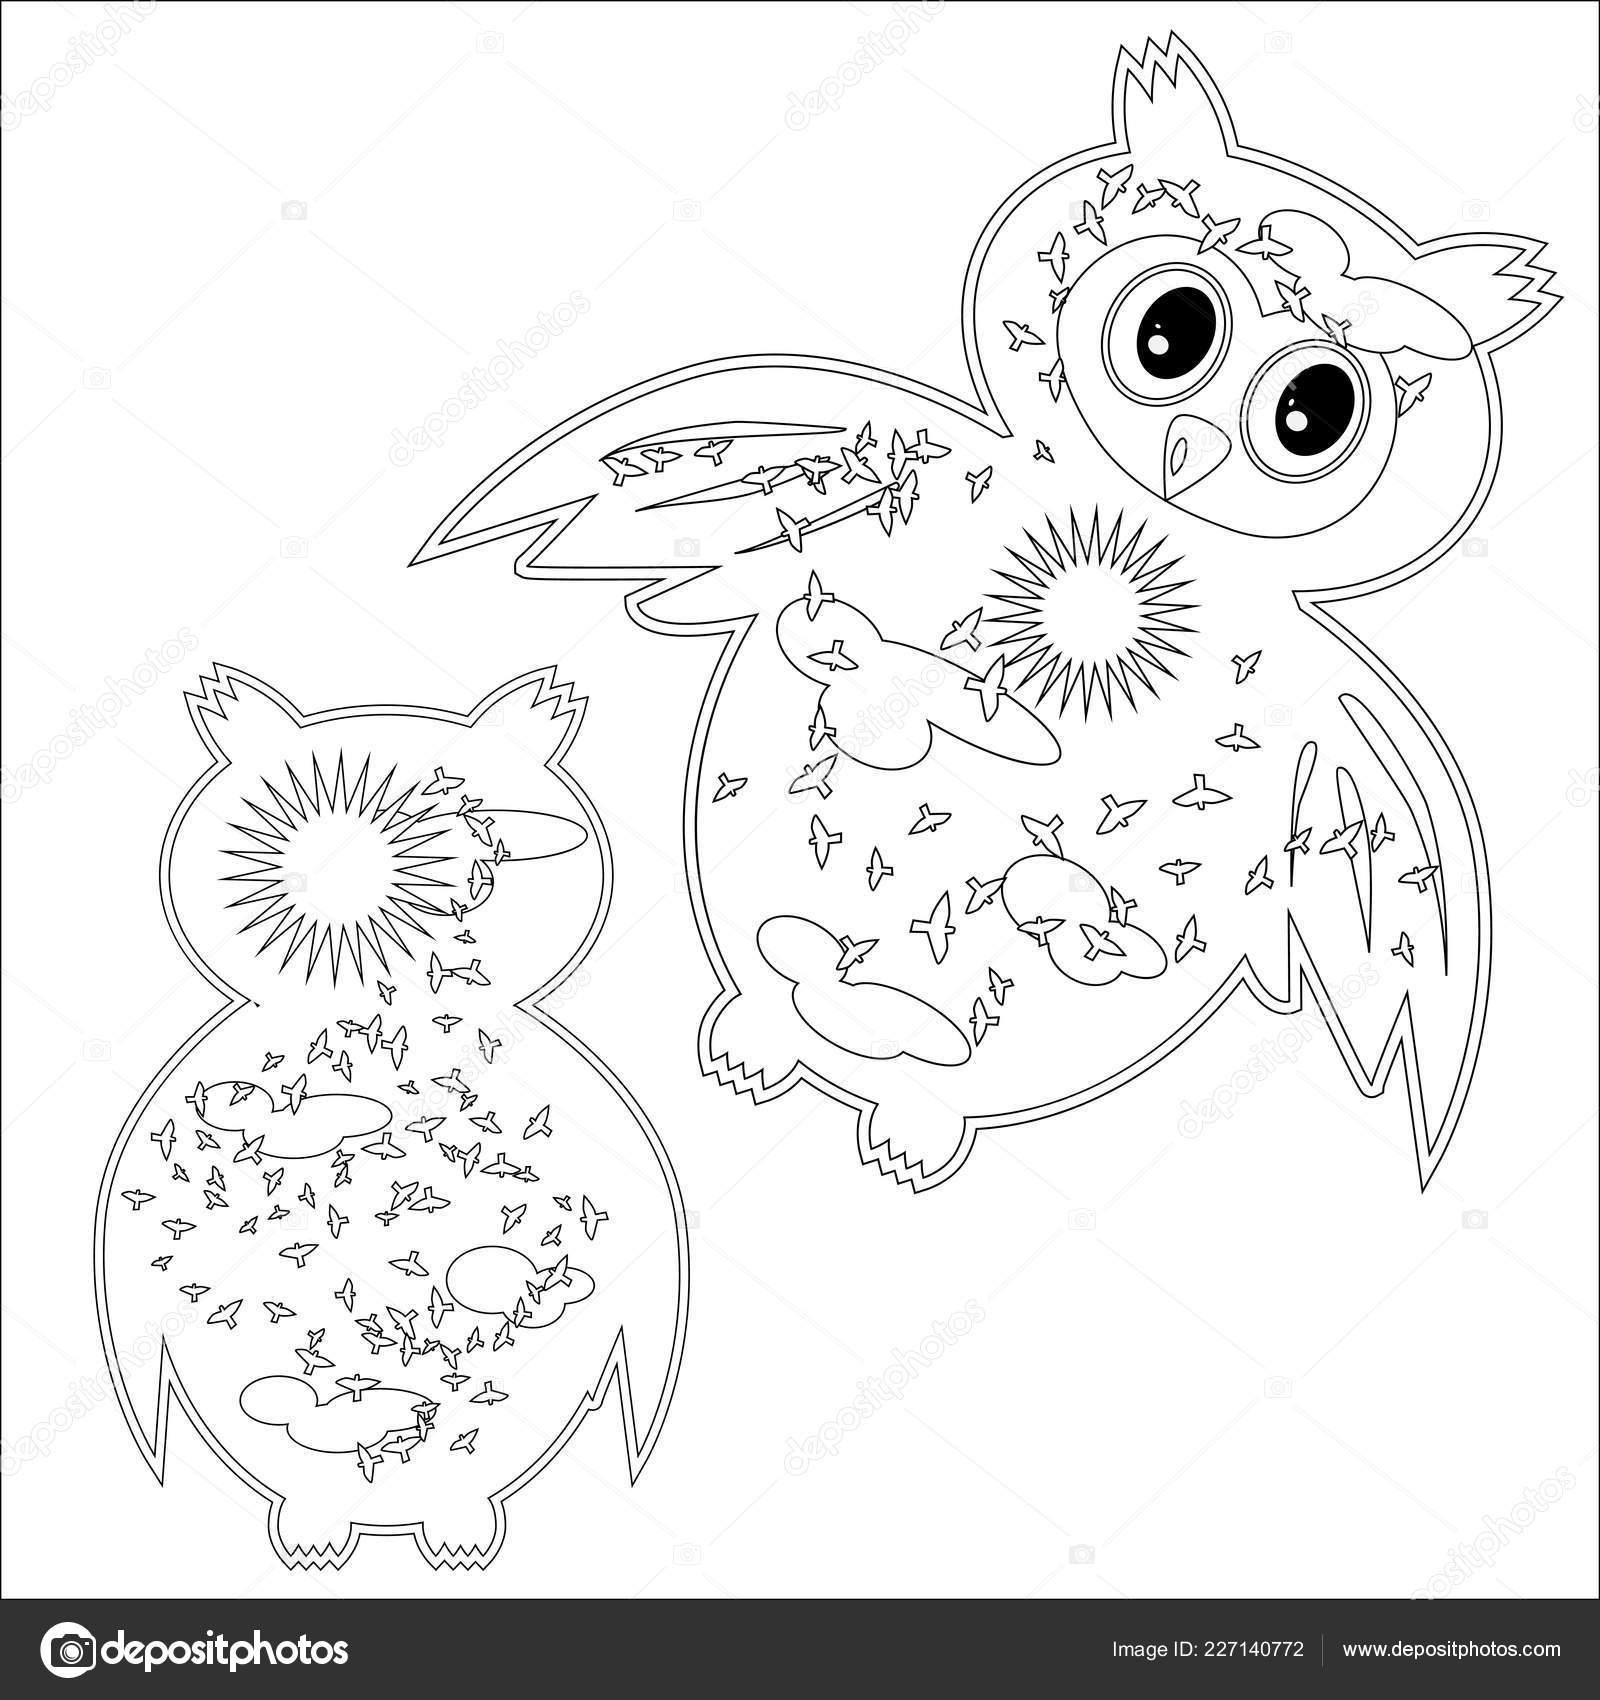 Download Coloring Page Symbol Moon Sun Owl Coloring Book Adult Antistress Vector Image By C Michiru13 Vector Stock 227140772